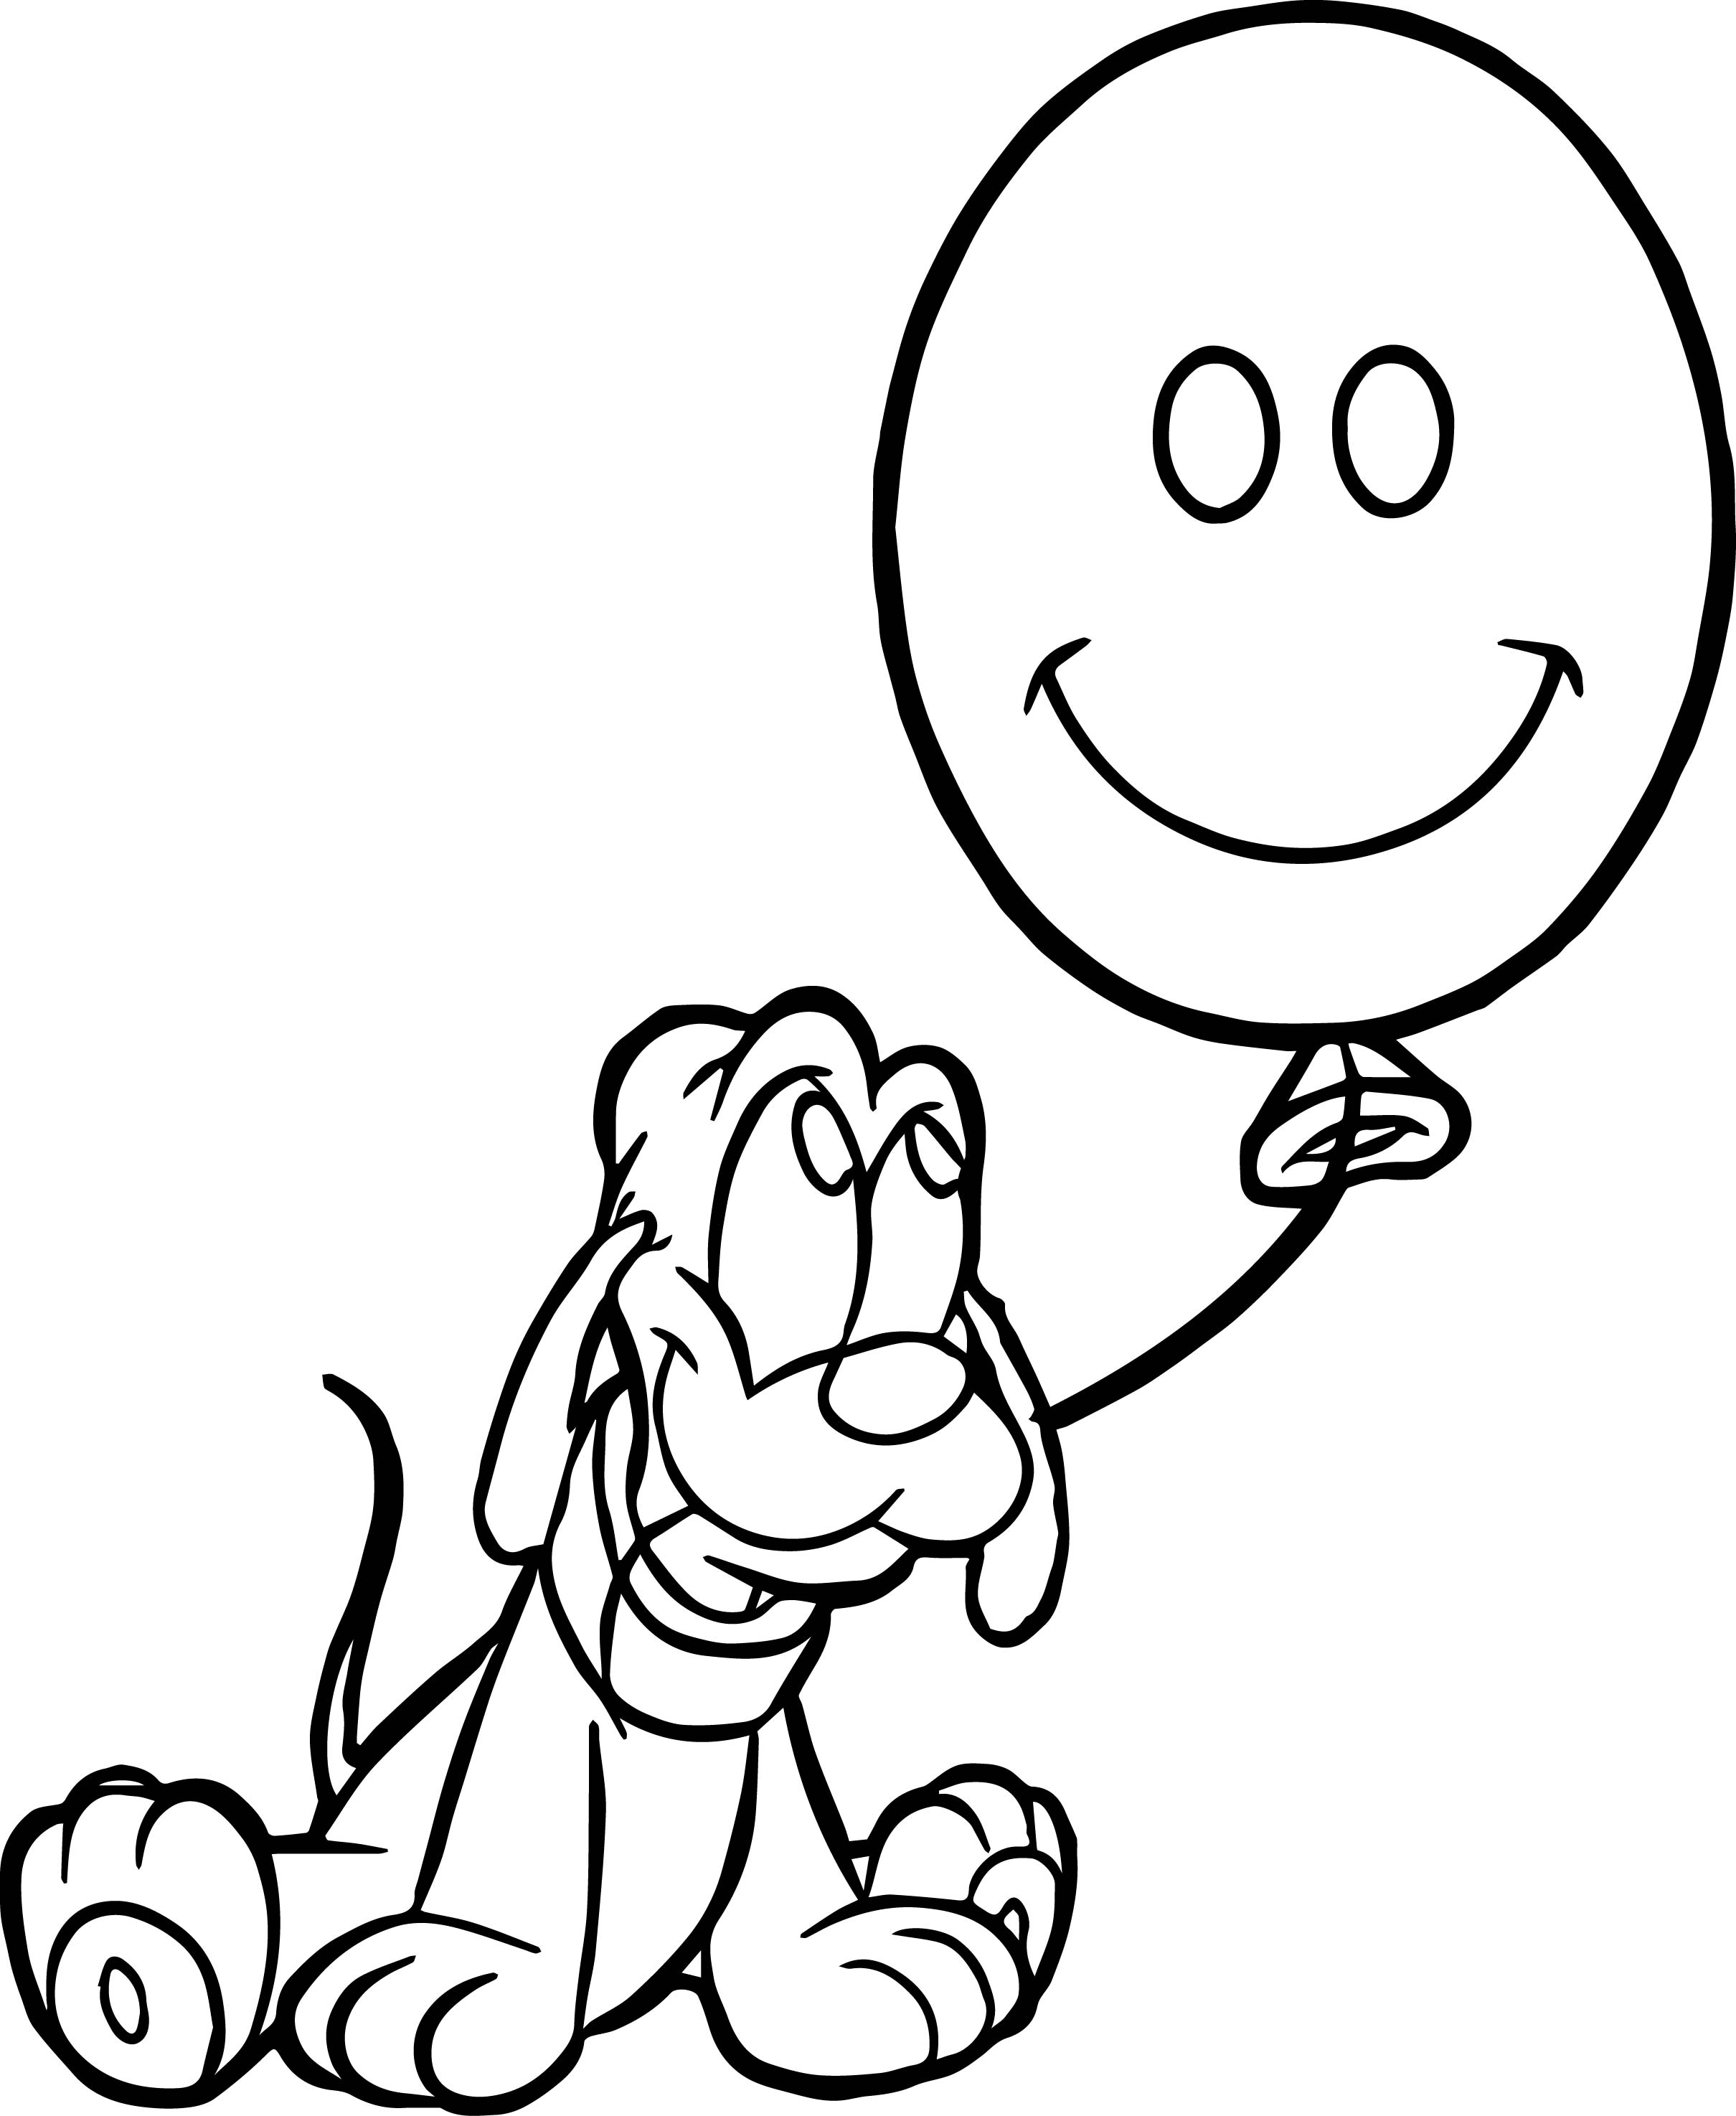 Pluto Balloon Coloring Page